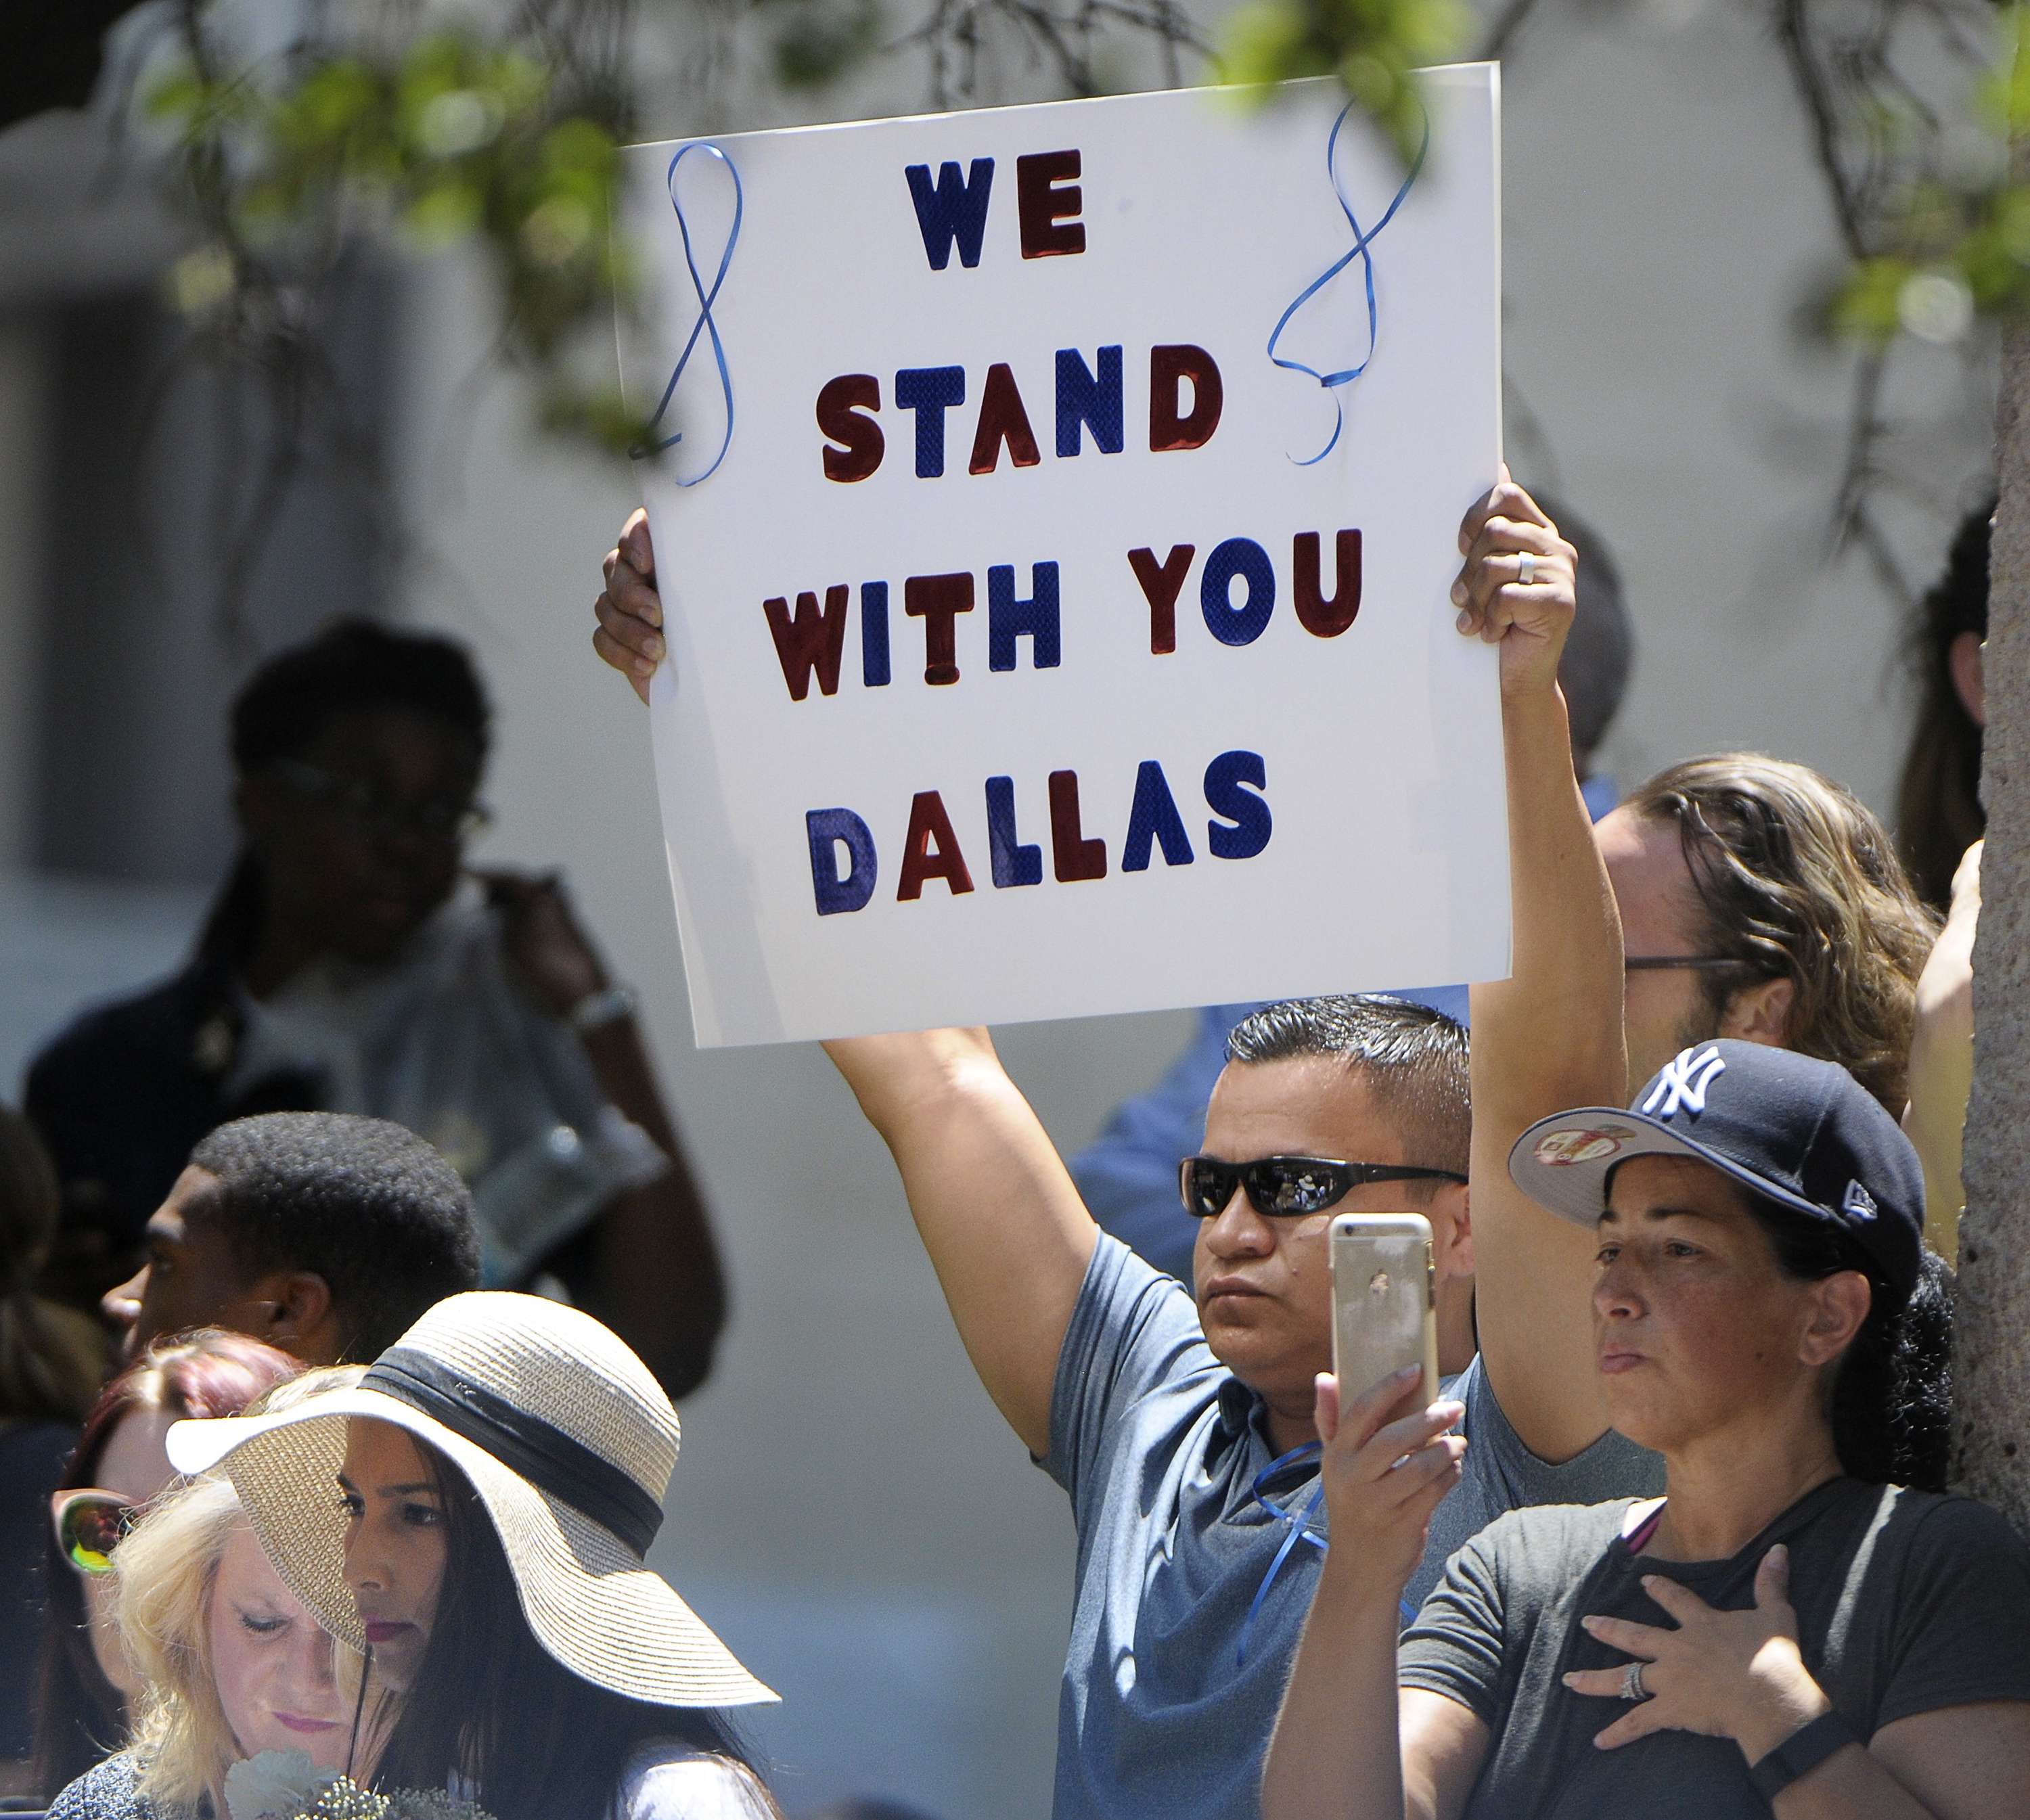 People attend an interfaith prayer event for the victims of the mass shooting that killed five police officers and wounded seven others, during a protest over recent police shootings in Minnesota and Louisiana, in Dallas, on July 8, 2016. Photo: TNS